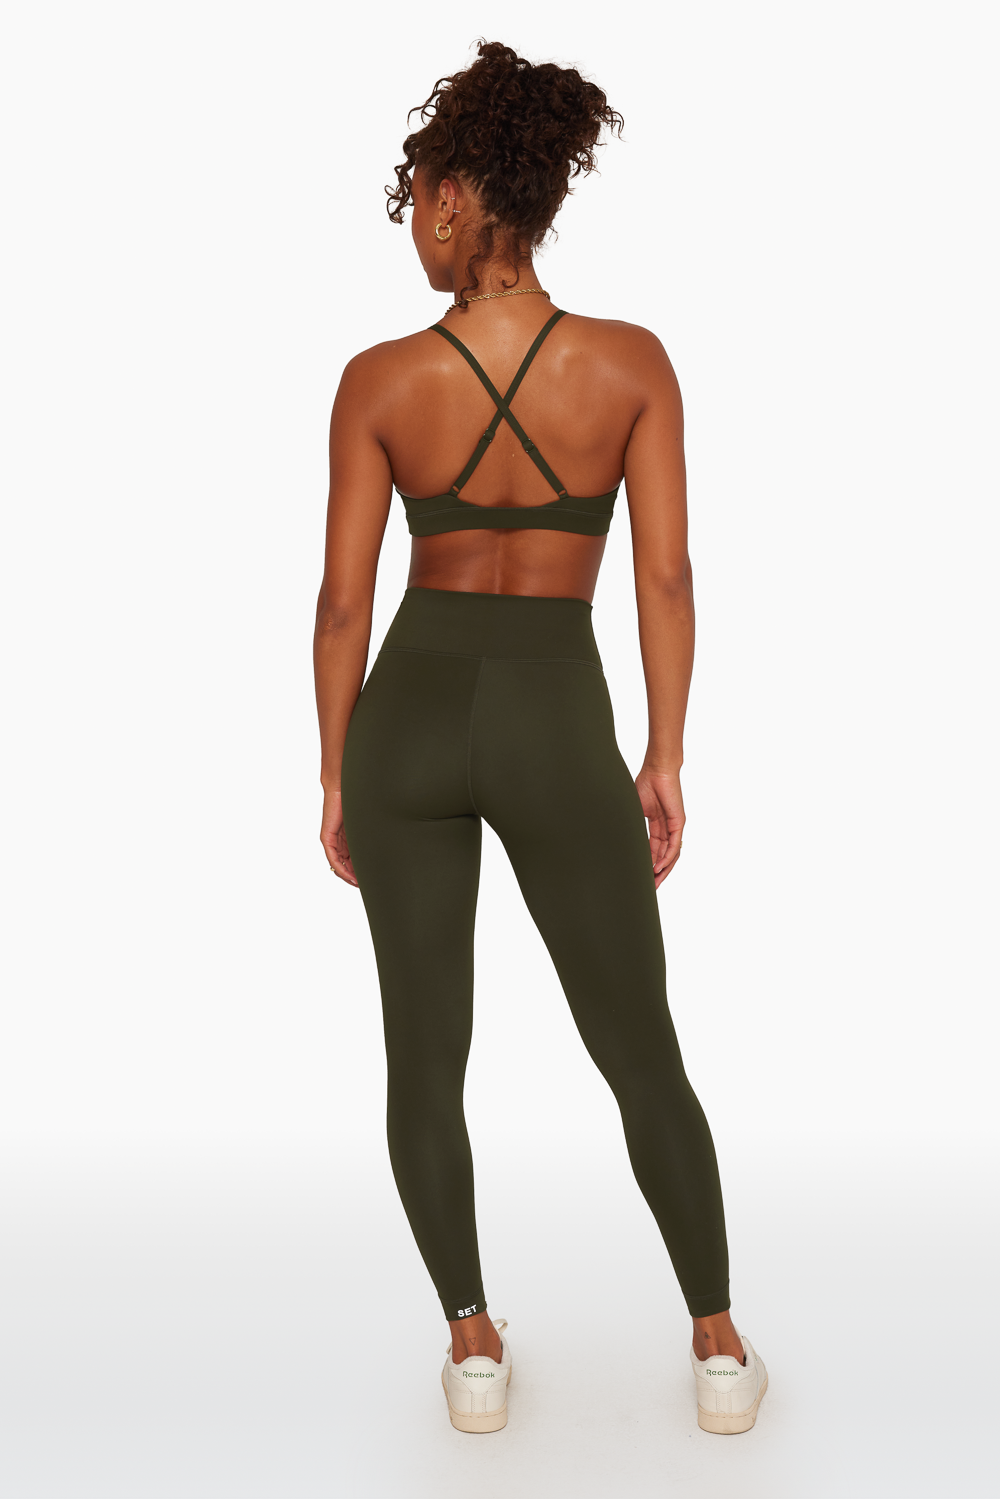 SET™ SPORTBODY® LEGGINGS IN AFTER HOURS